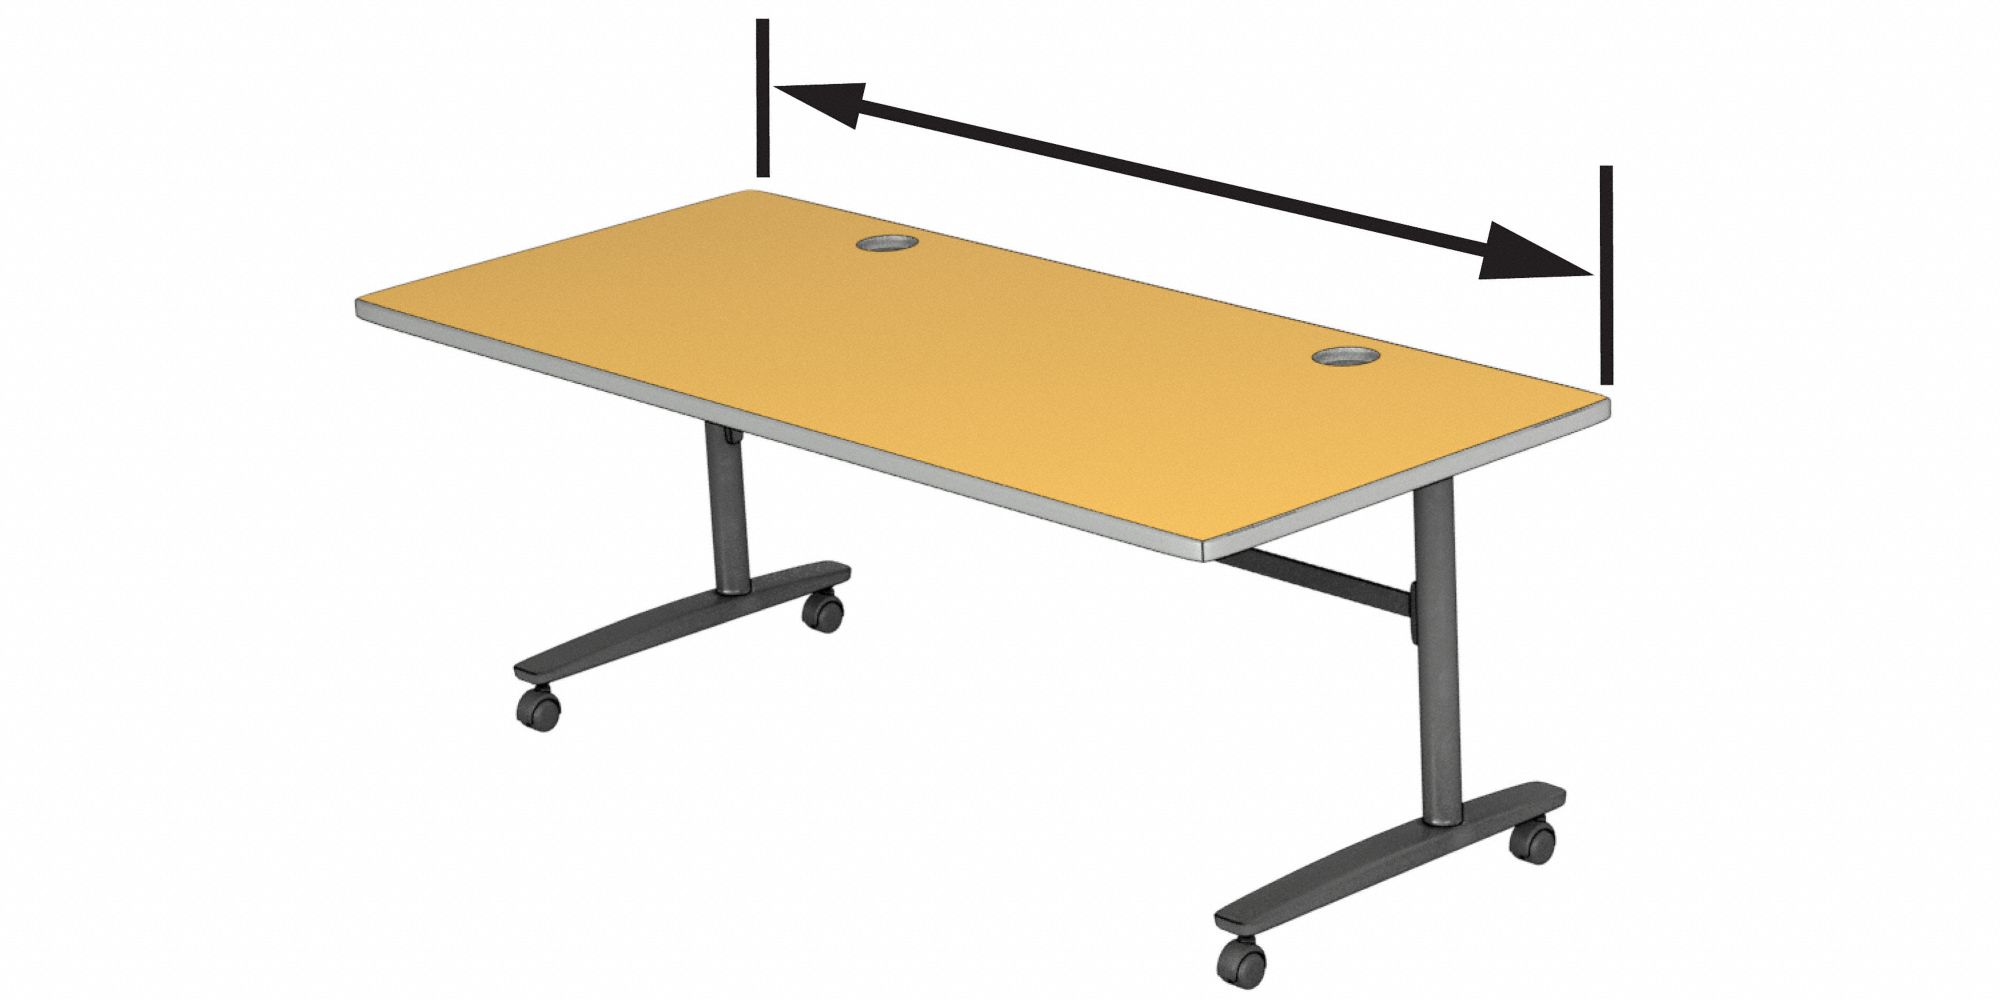 Power+USB Outlet . Fold+Nest Storage Modesty Panel Tables Training Meeting Seminar Classroom Model 5547 18pc Beech Folding Industrial Caster Z-Base Seating Included Tables Connect Shelf